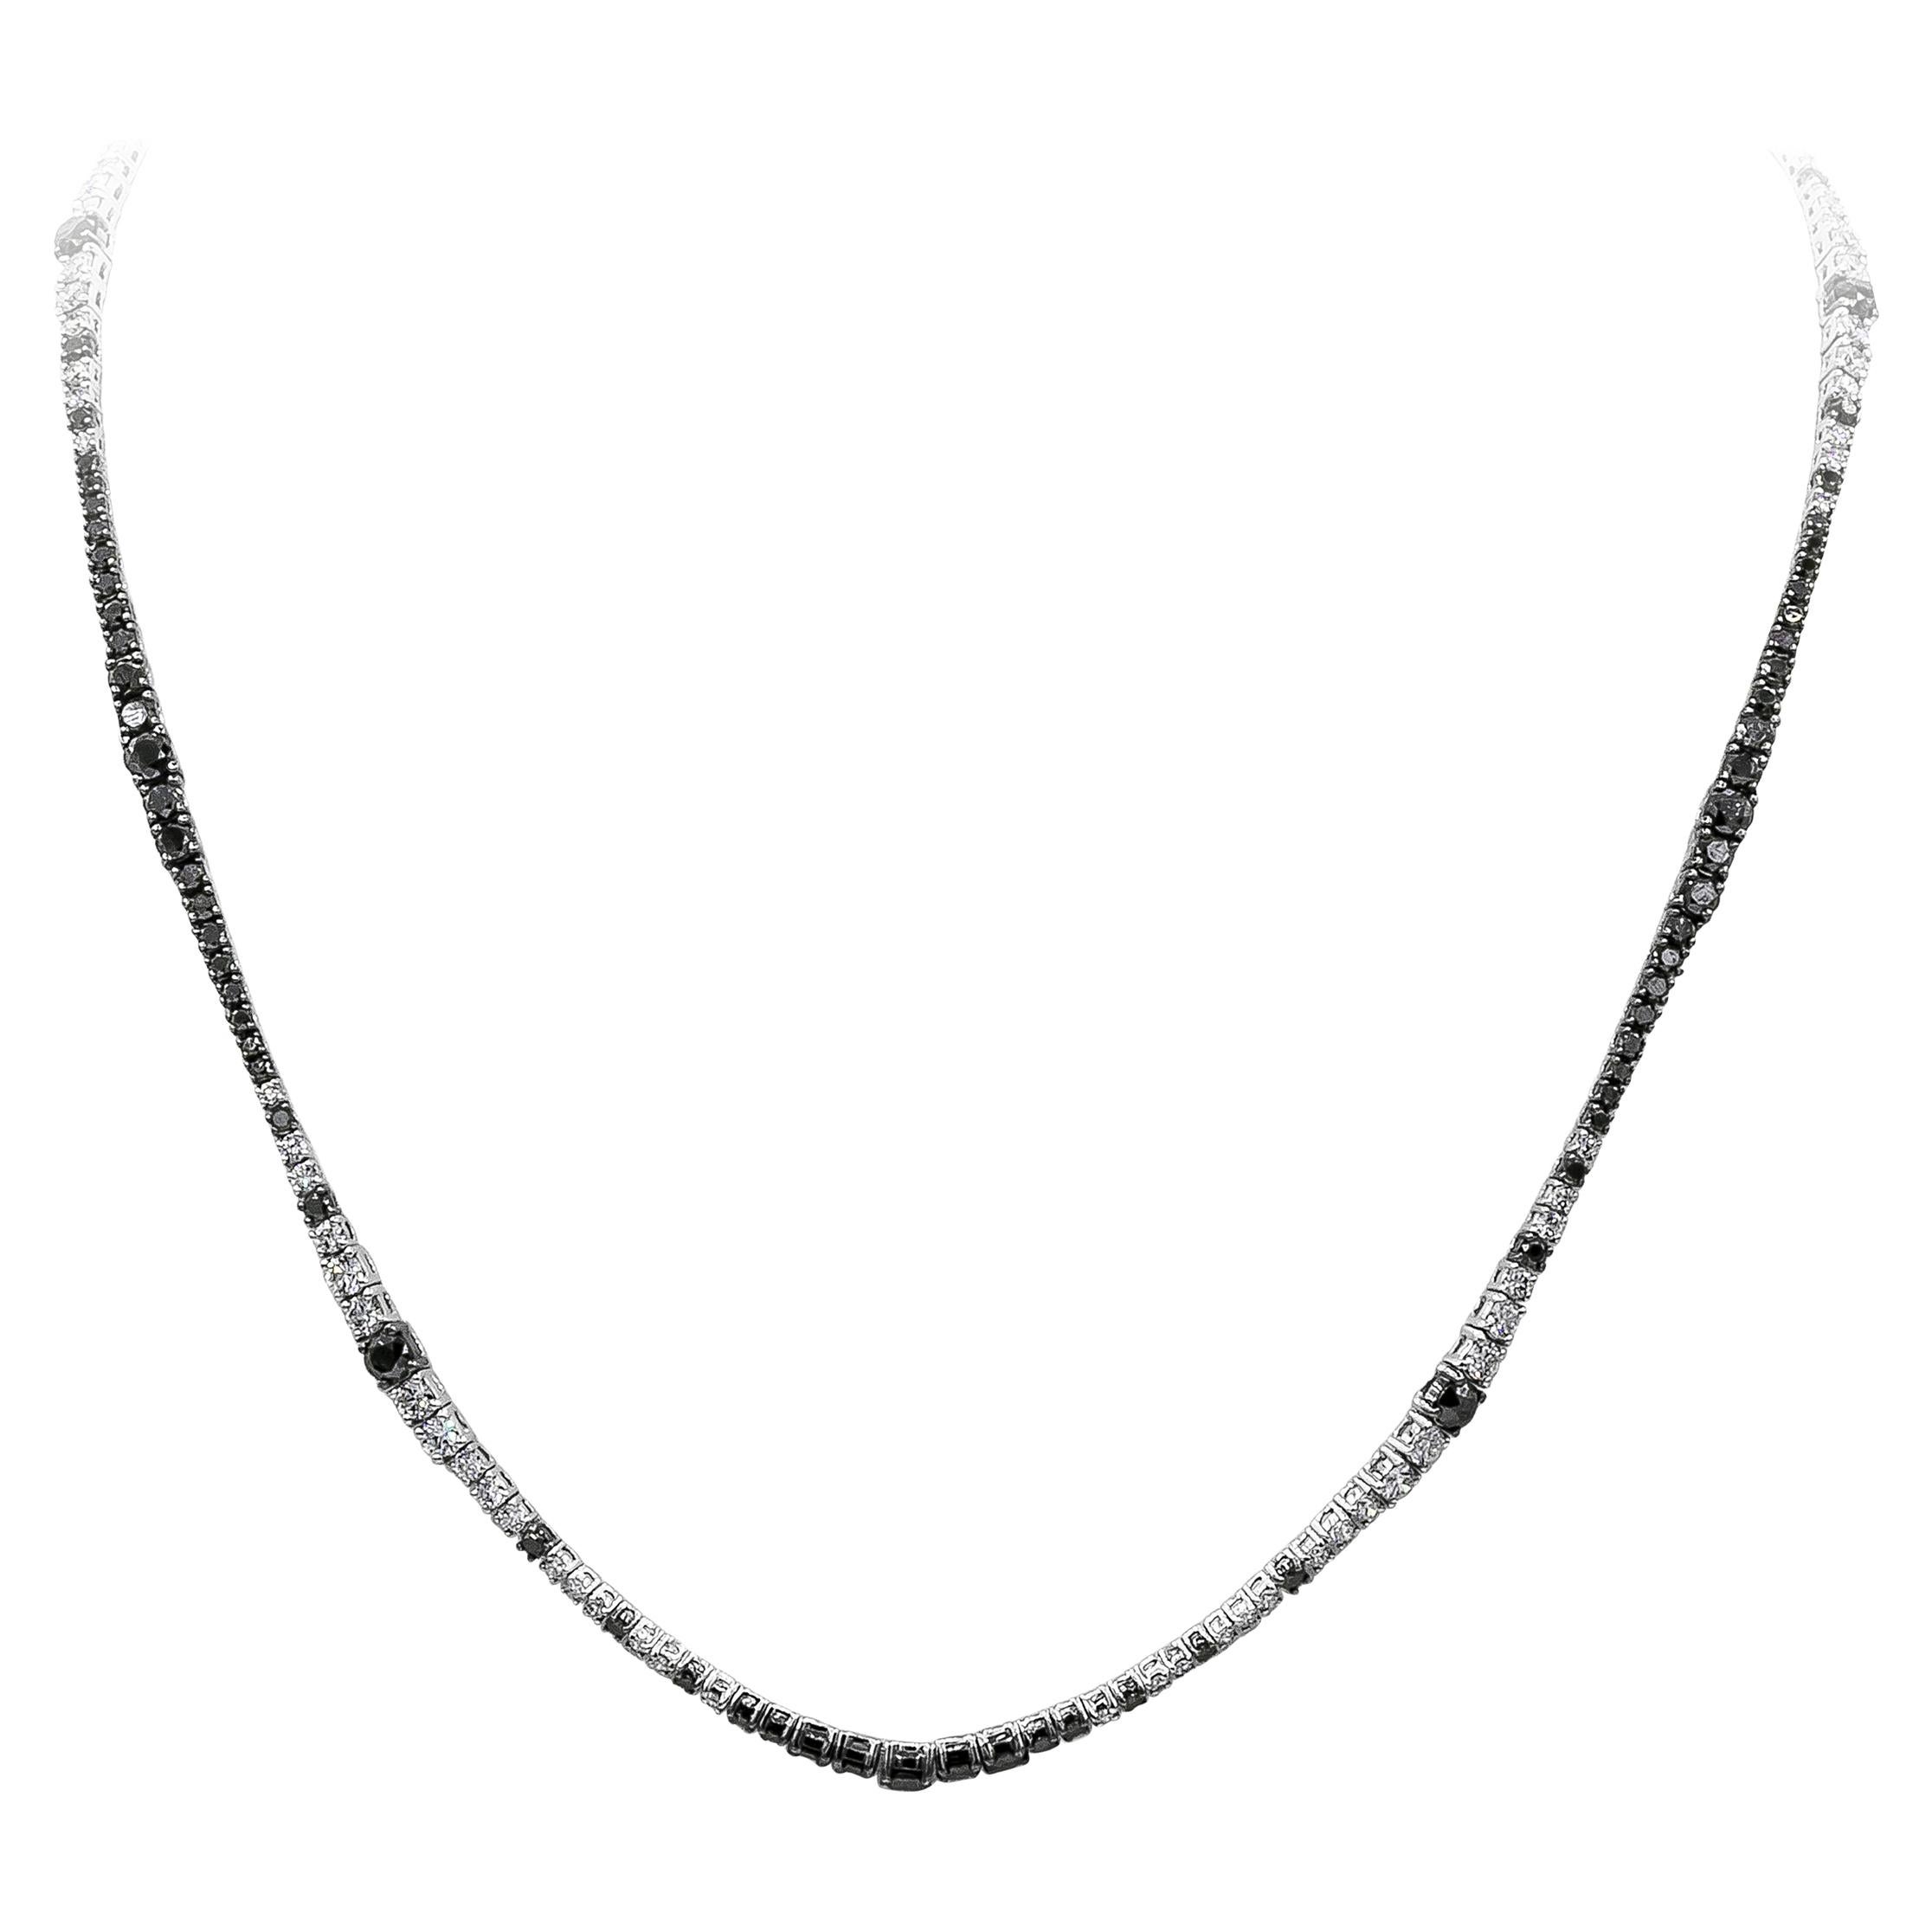 22.54 Carats Total White and Black Round Diamond Riviera Tennis Necklace